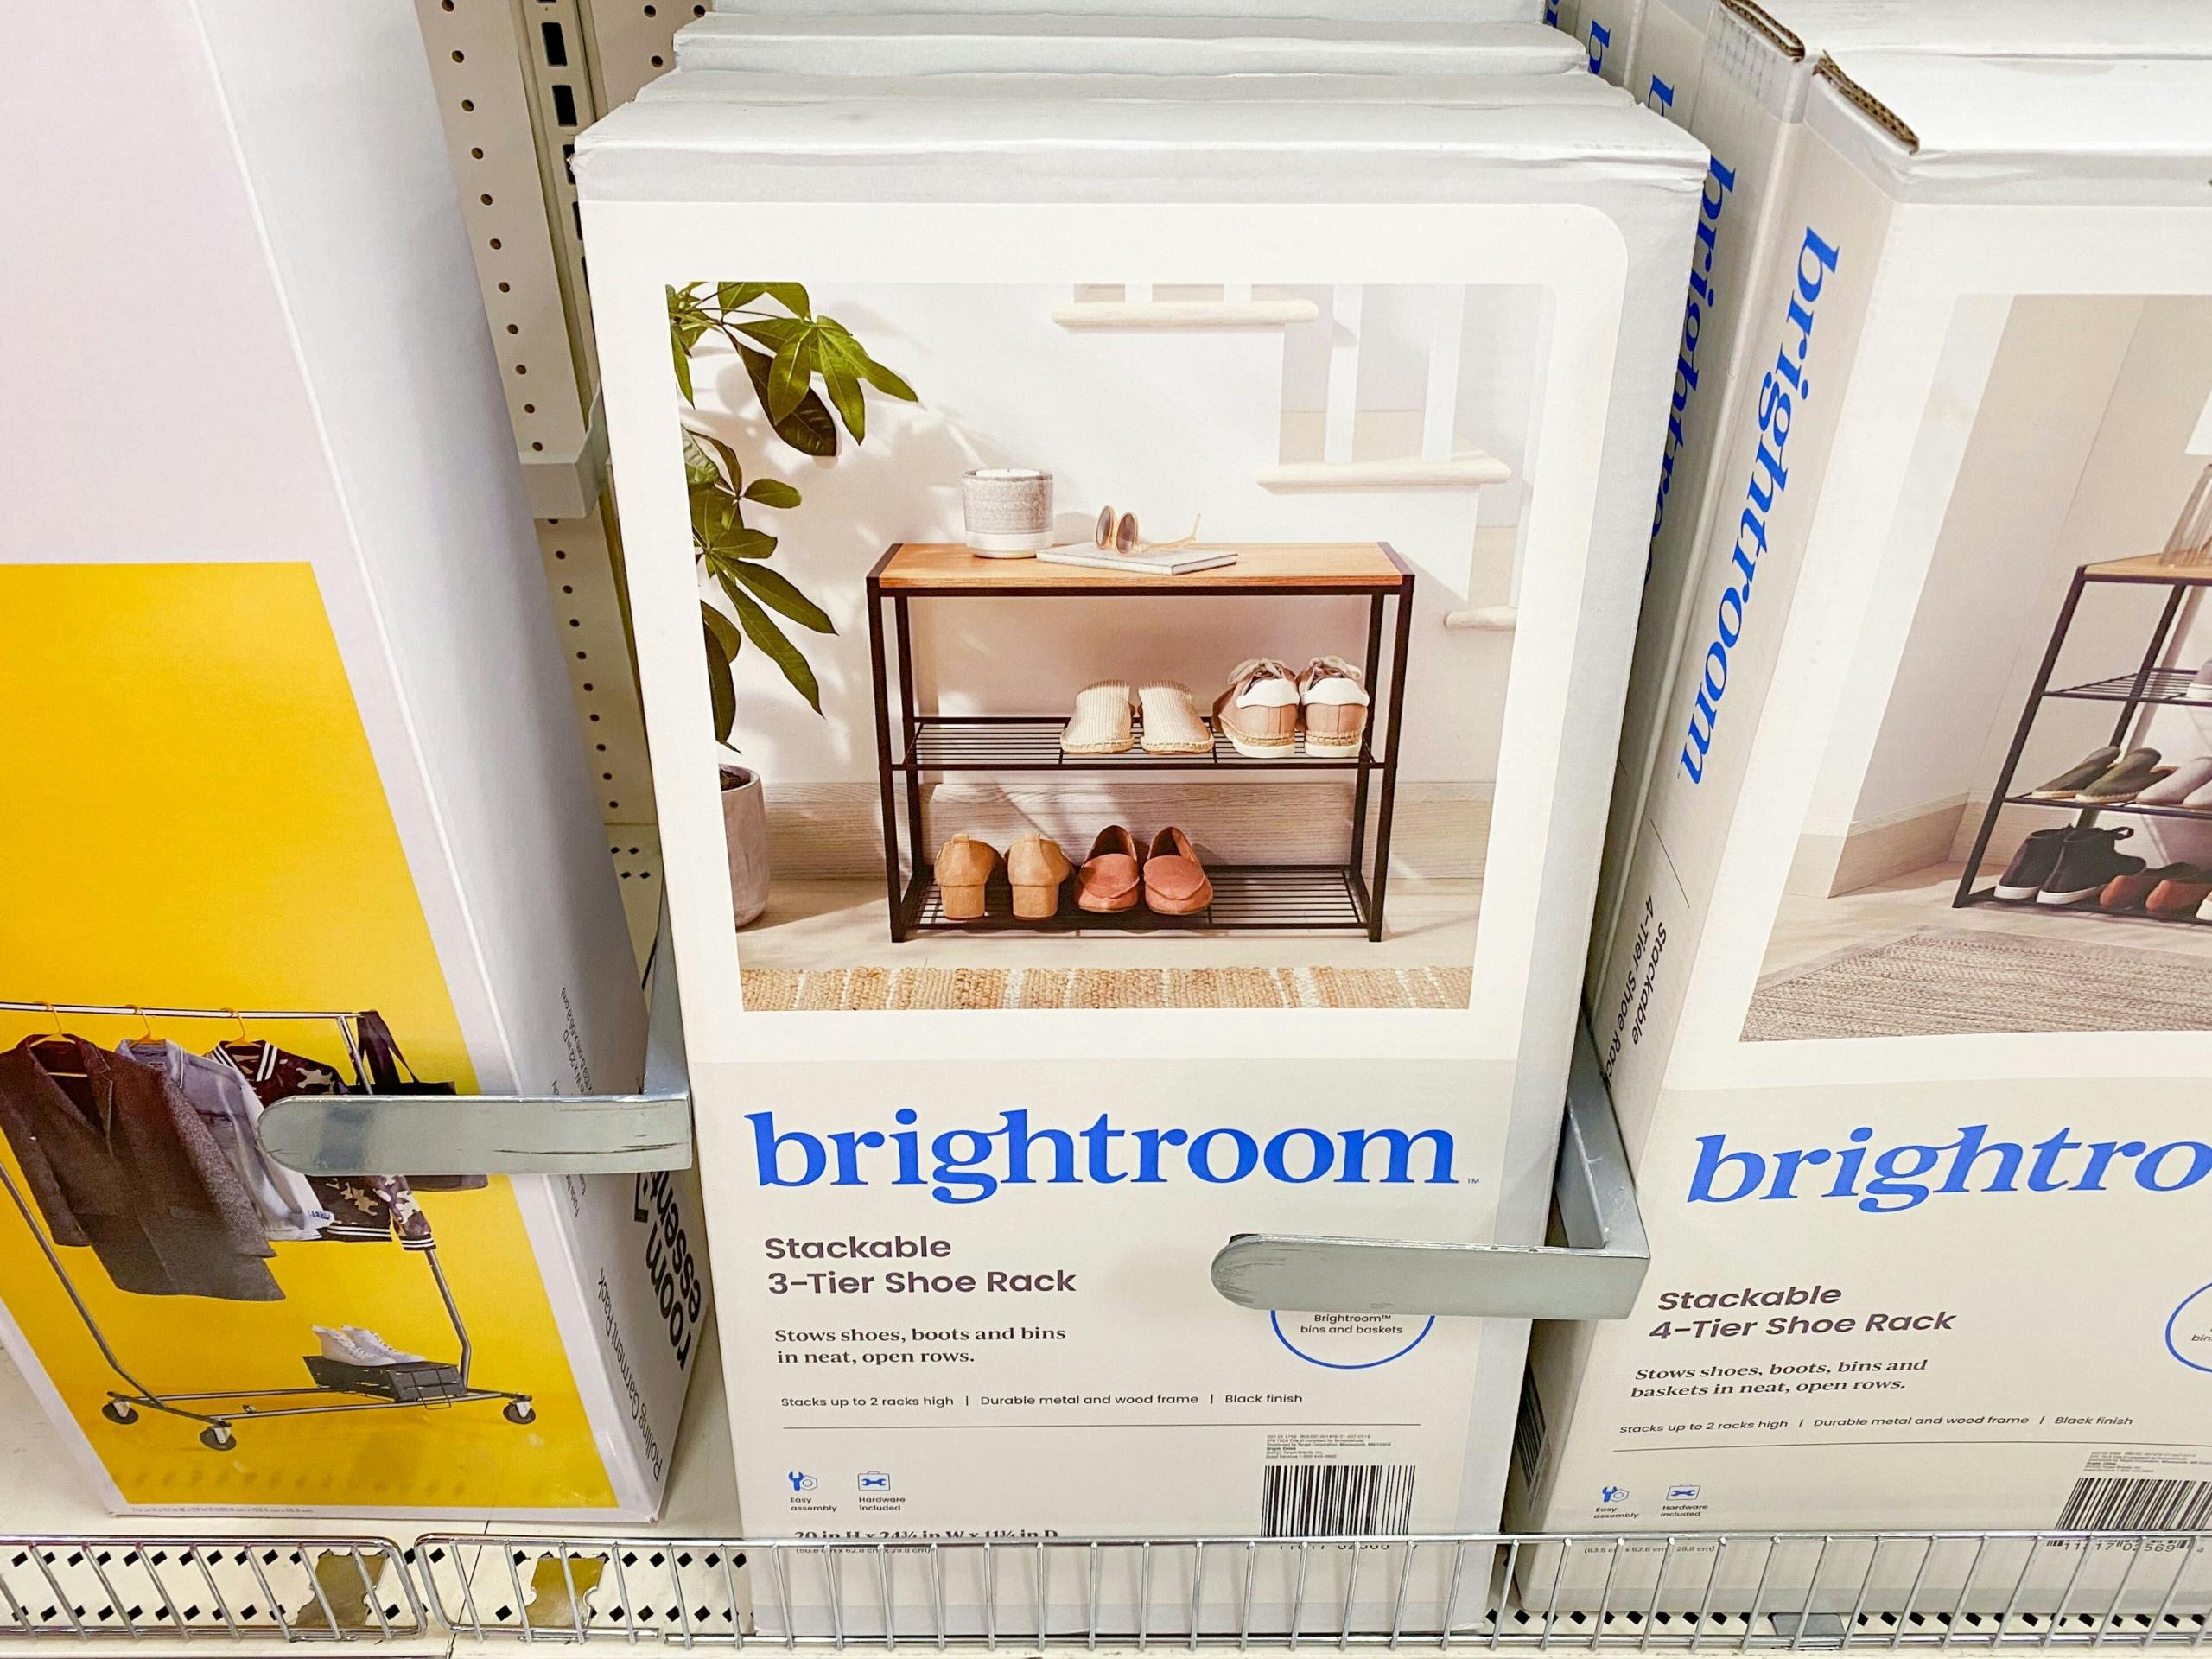 Brightroom Storage Target 2022 7 1653235741 1653235741 Scaled ?auto=compress,format&fit=max